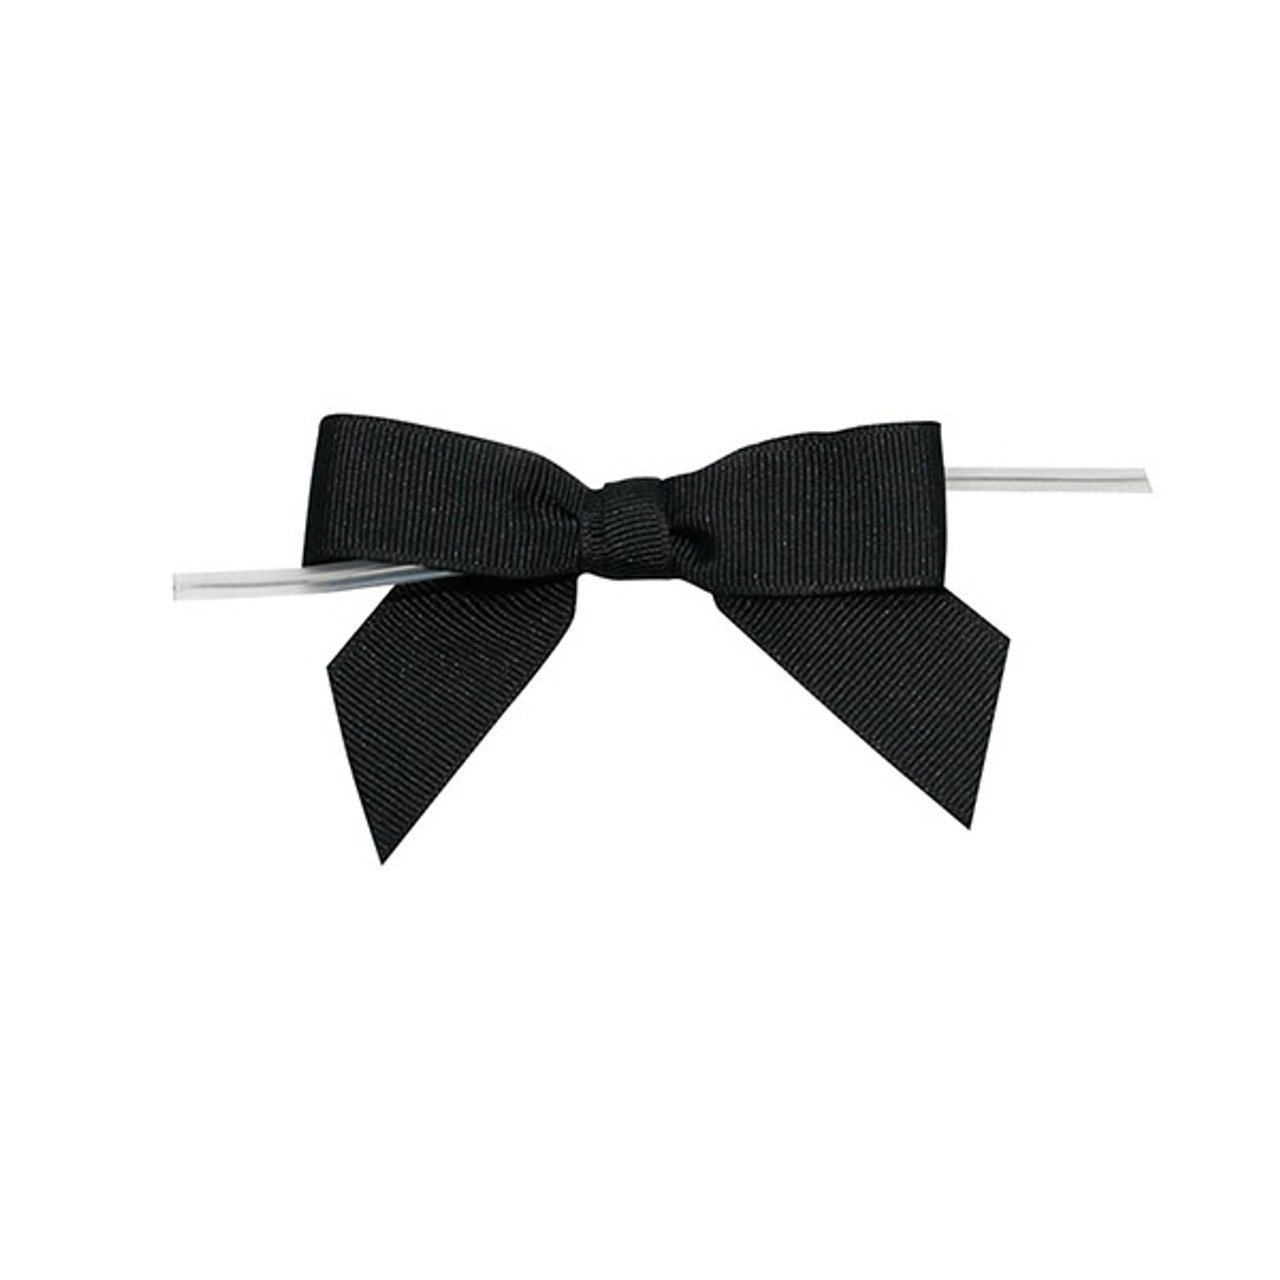 Ribbon Bow with Twist Tie - Forest Green Grosgrain - (50 Bows Pack